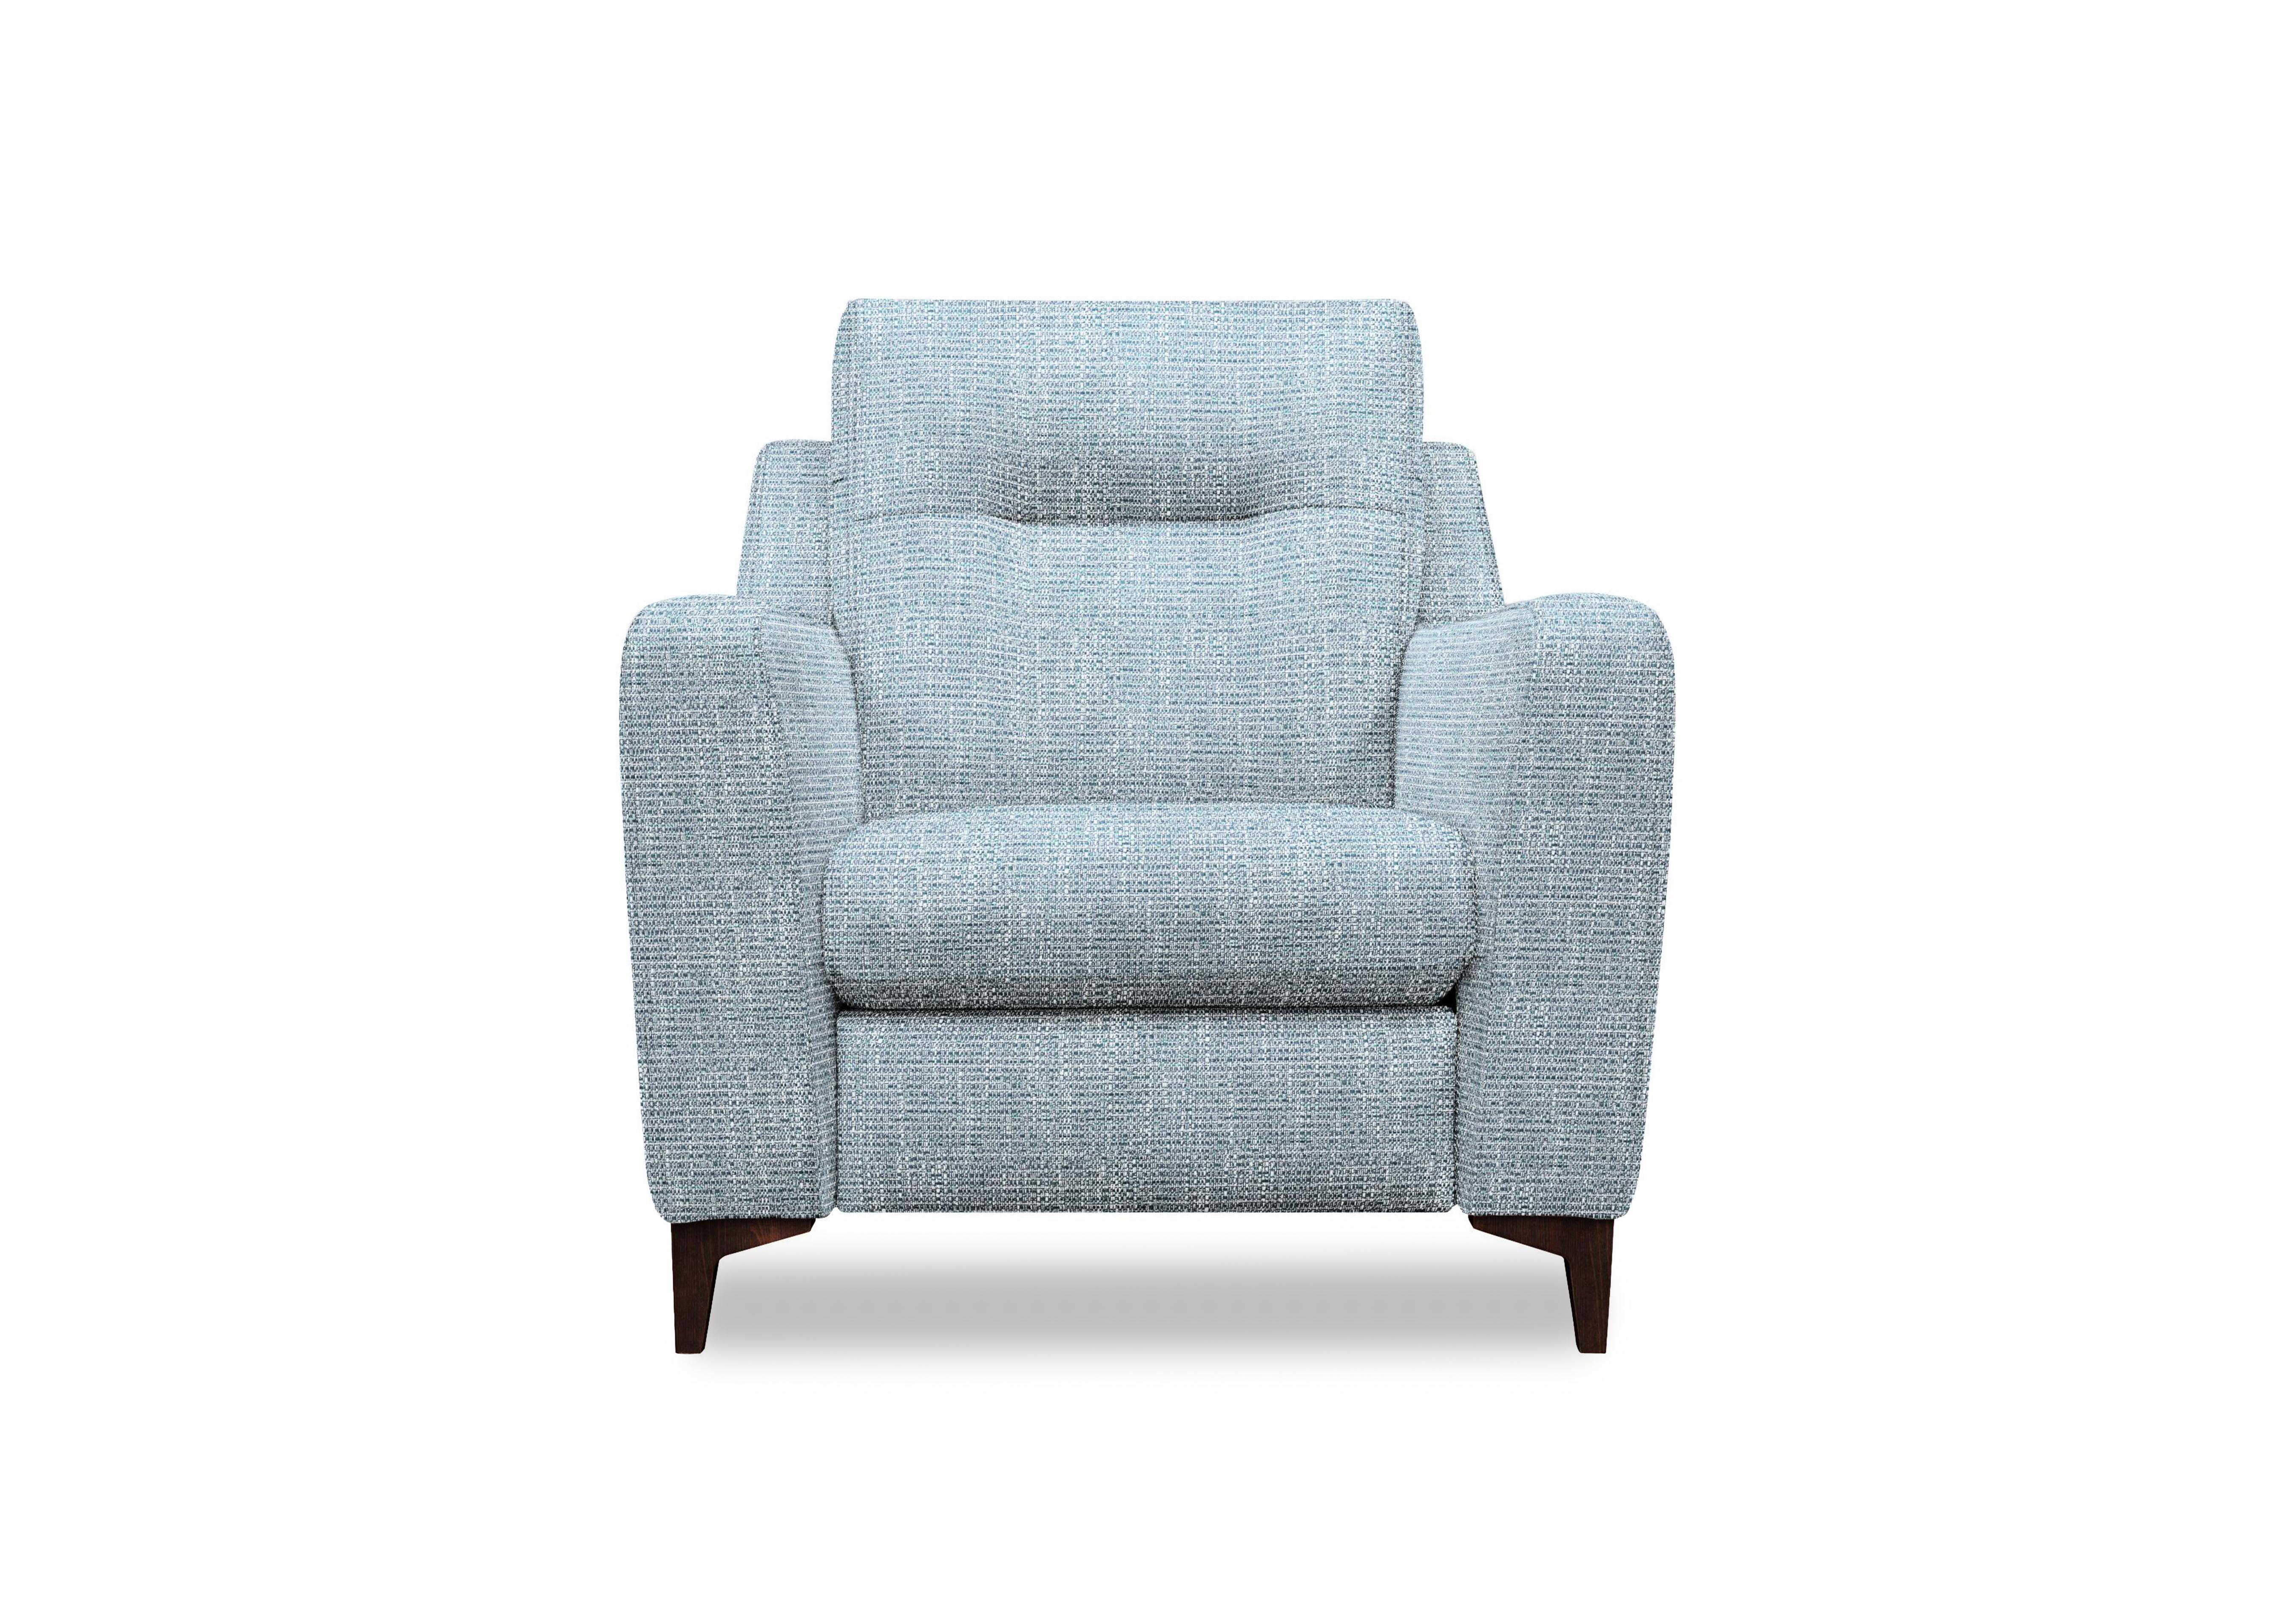 Arlo Fabric Chair in B133 Libby Sky Wal Ft on Furniture Village